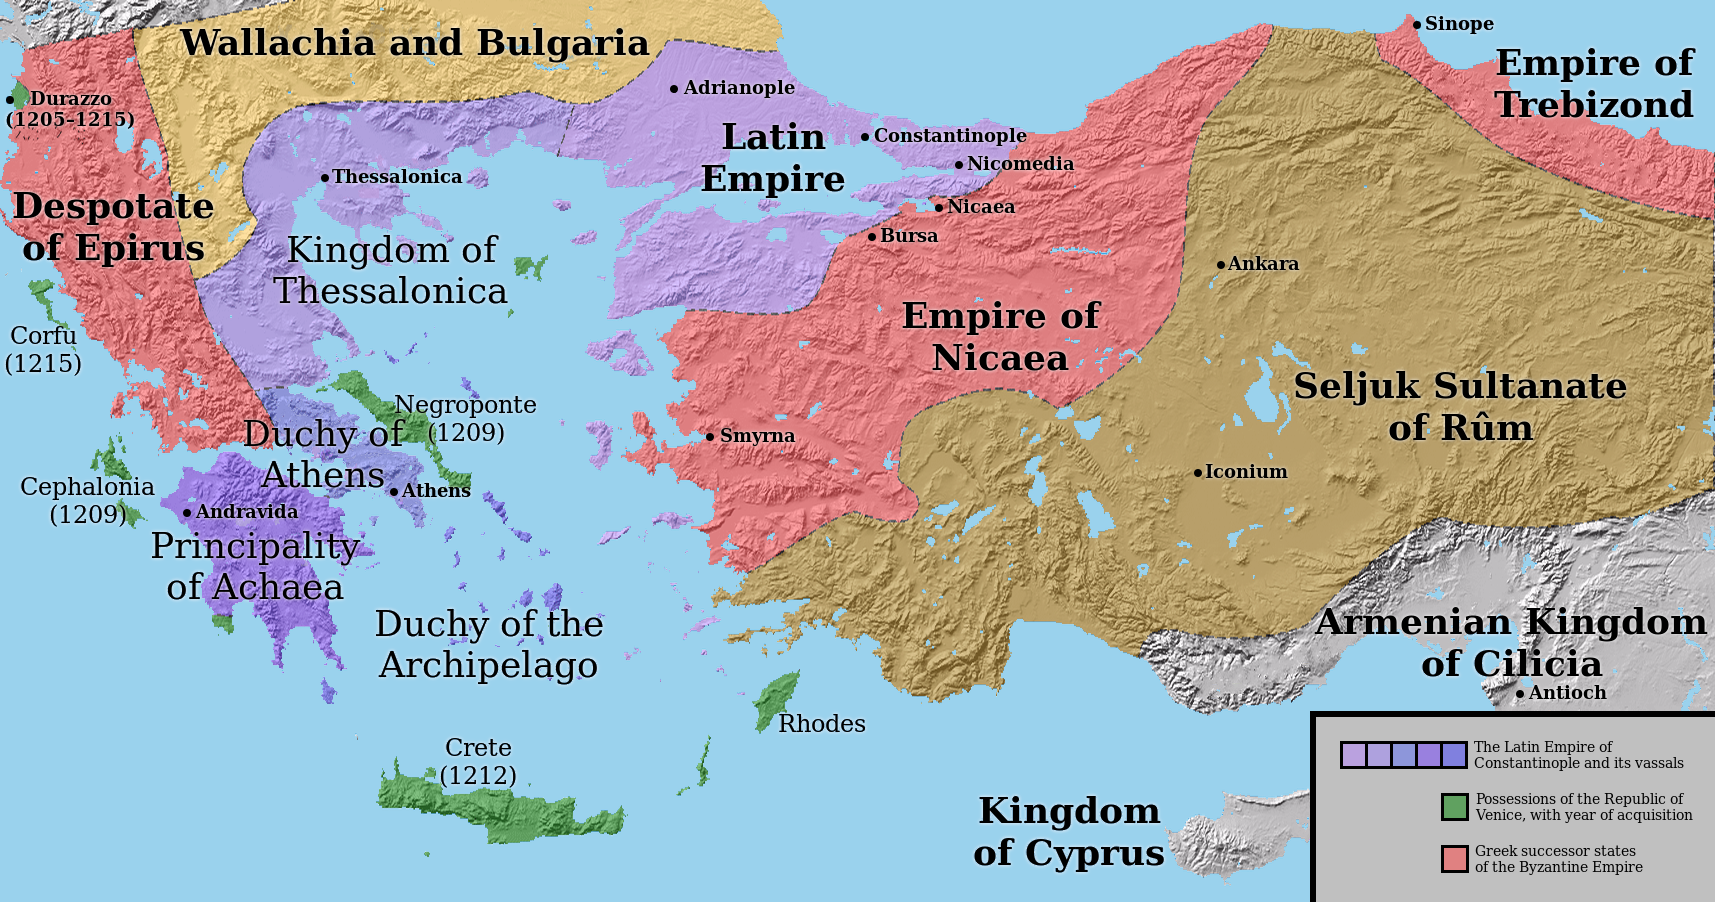 the latin empire 1204 1261 the late middle ages in eastern europe